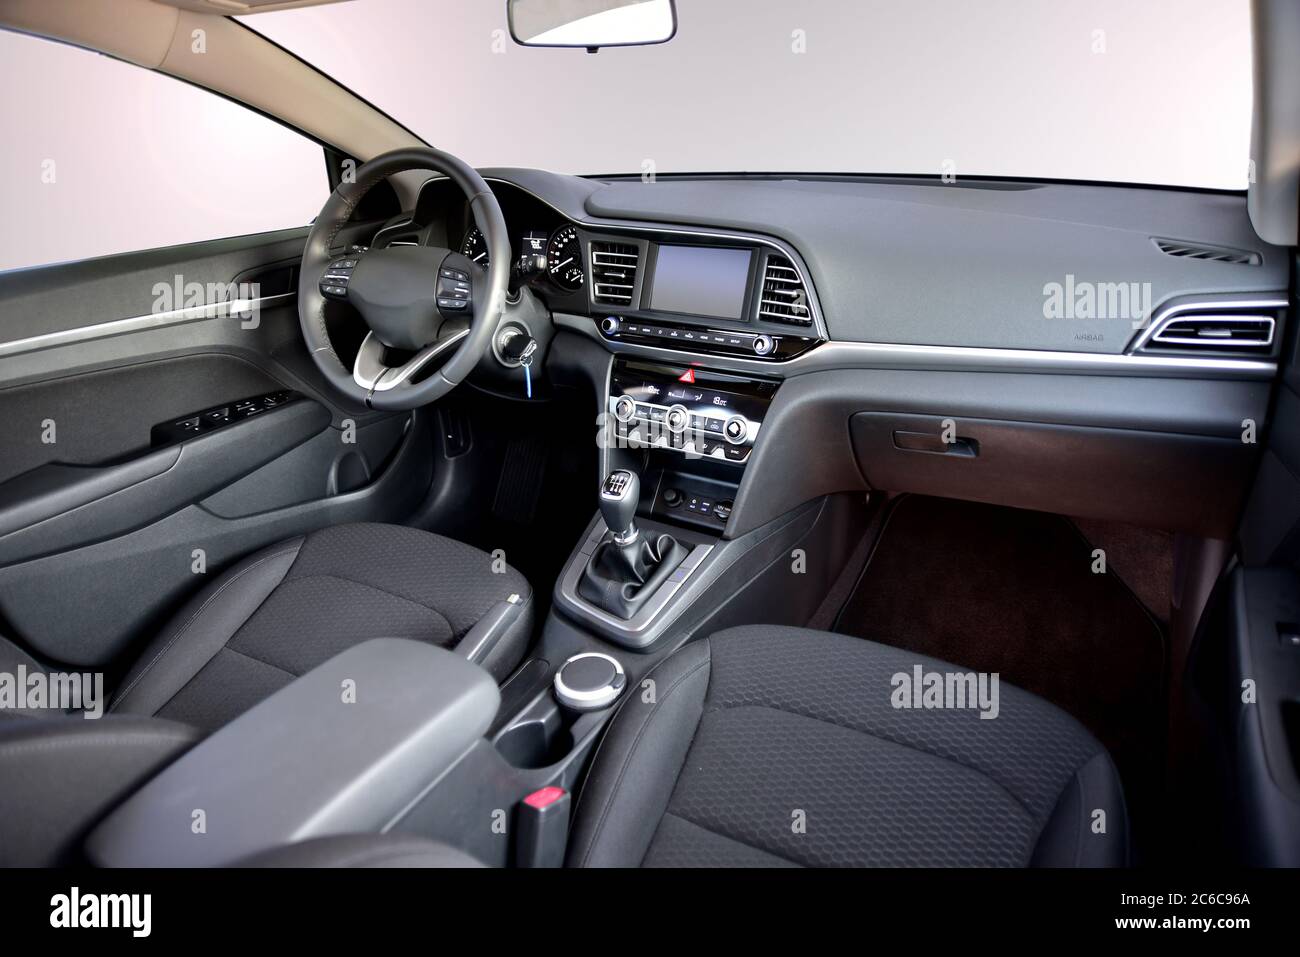 471,560 Car Interior Royalty-Free Photos and Stock Images